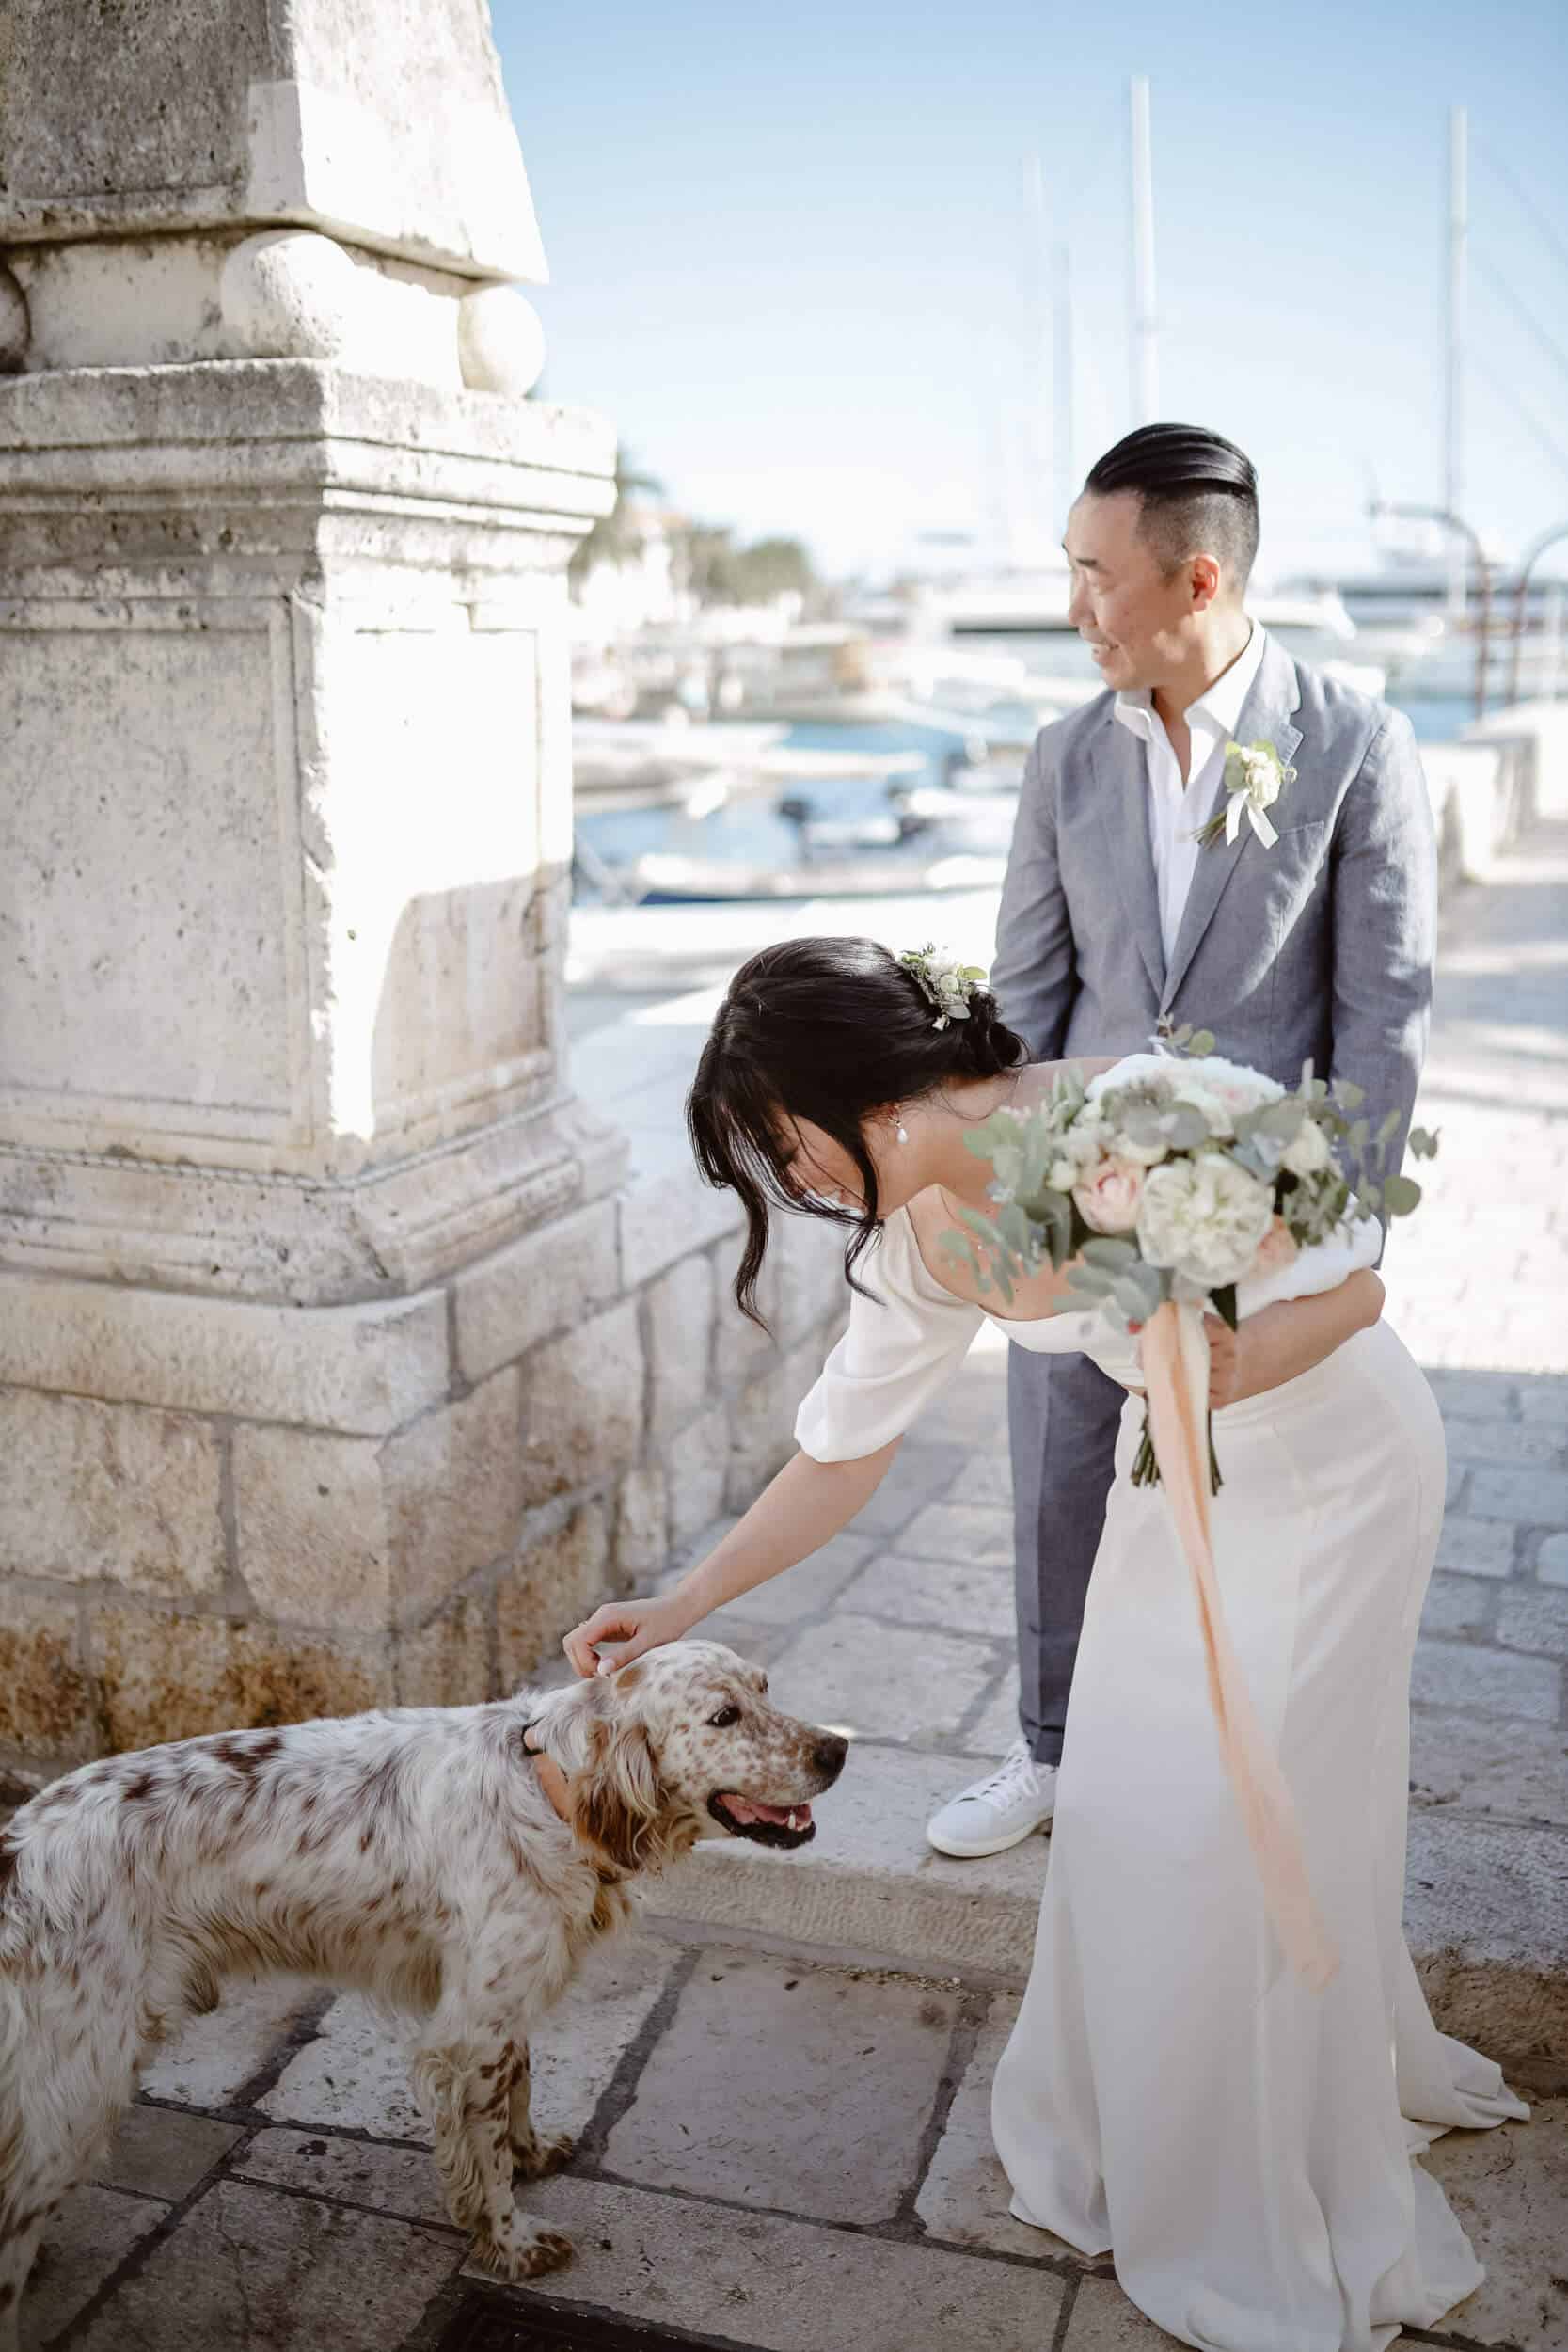 Wedding in Hvar in 2022: The best guide for your special day